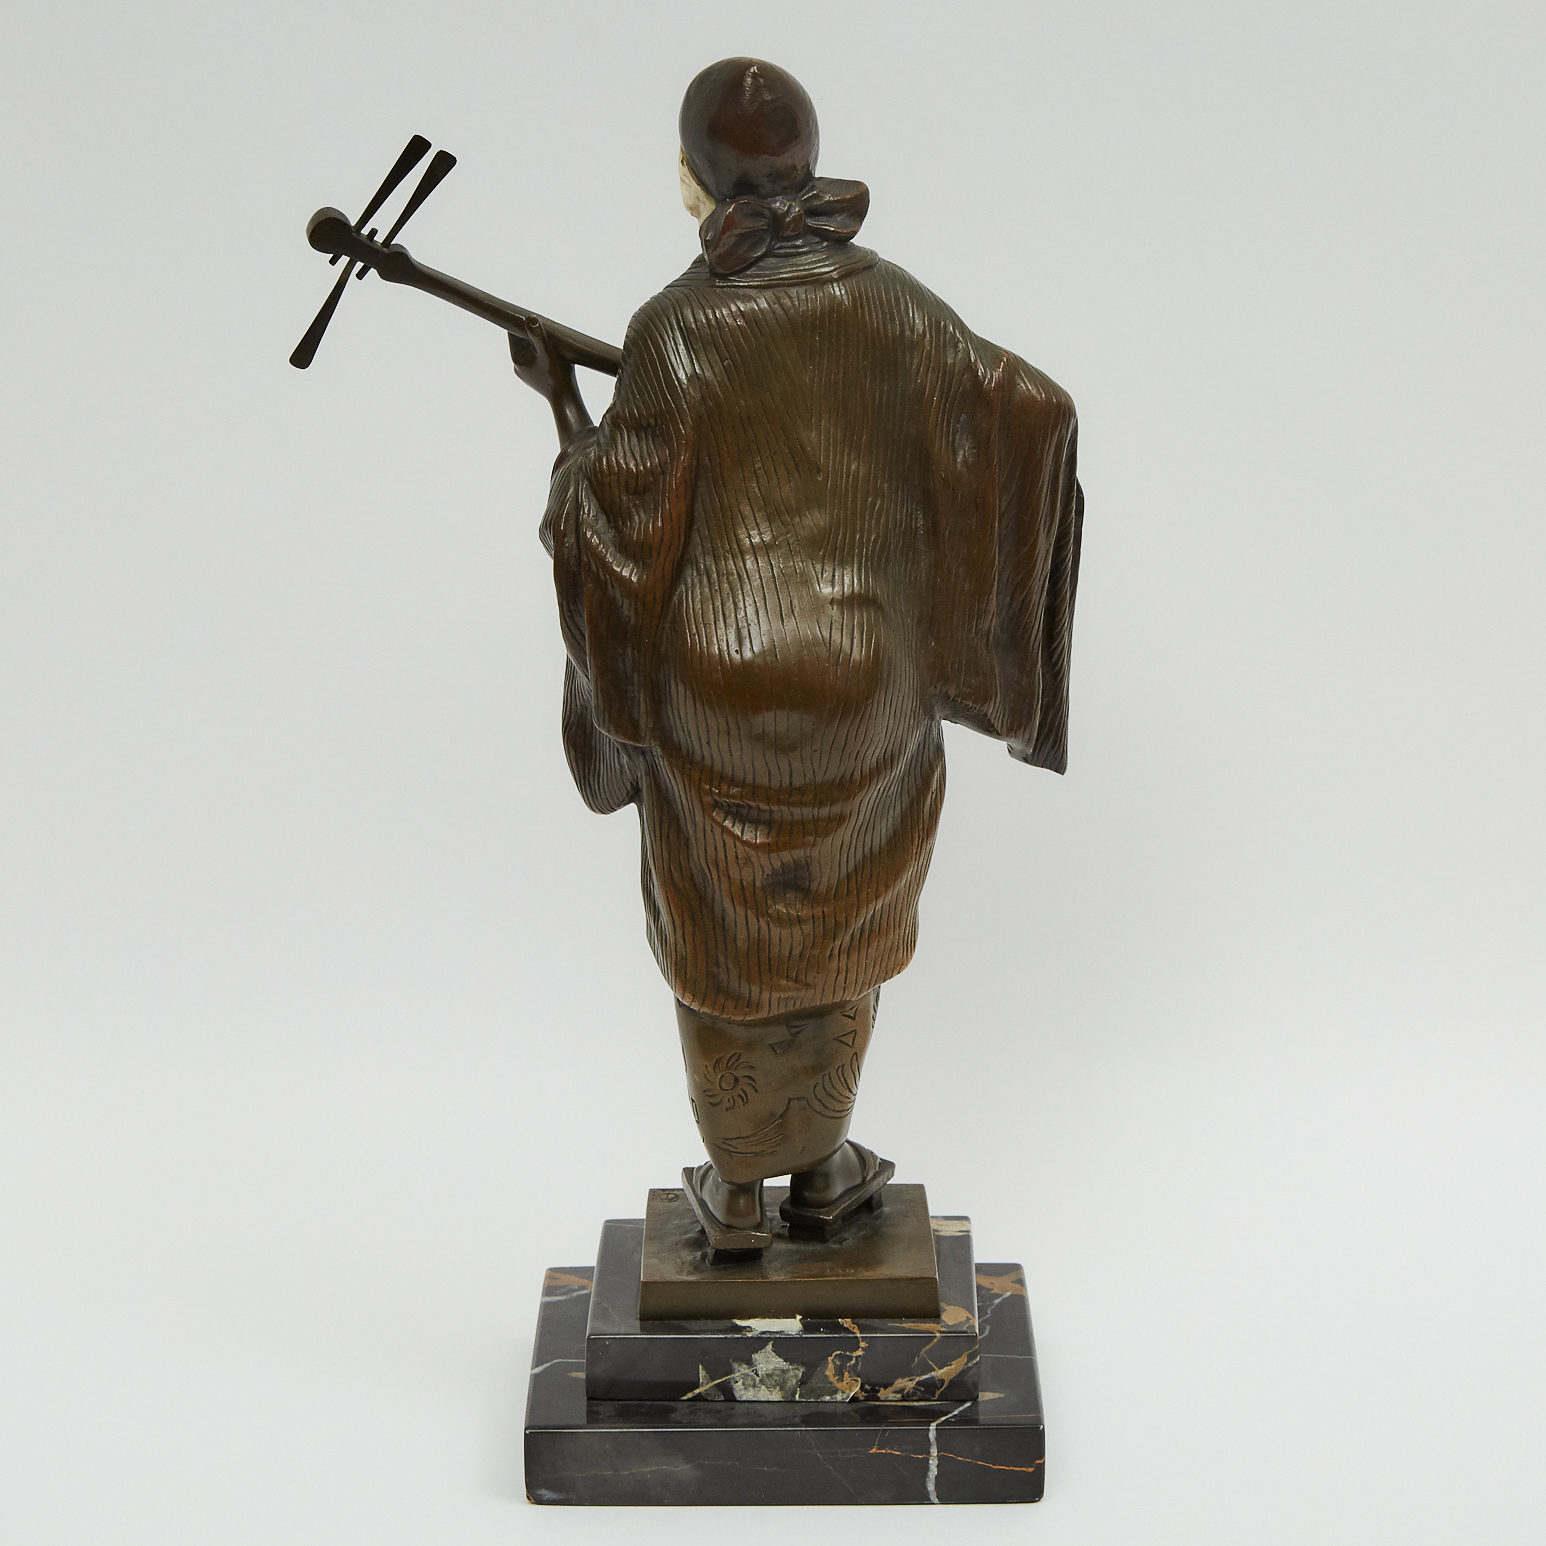 Austrian Orientalist Bronze and Ivory Figure of a Musician, early 20th century